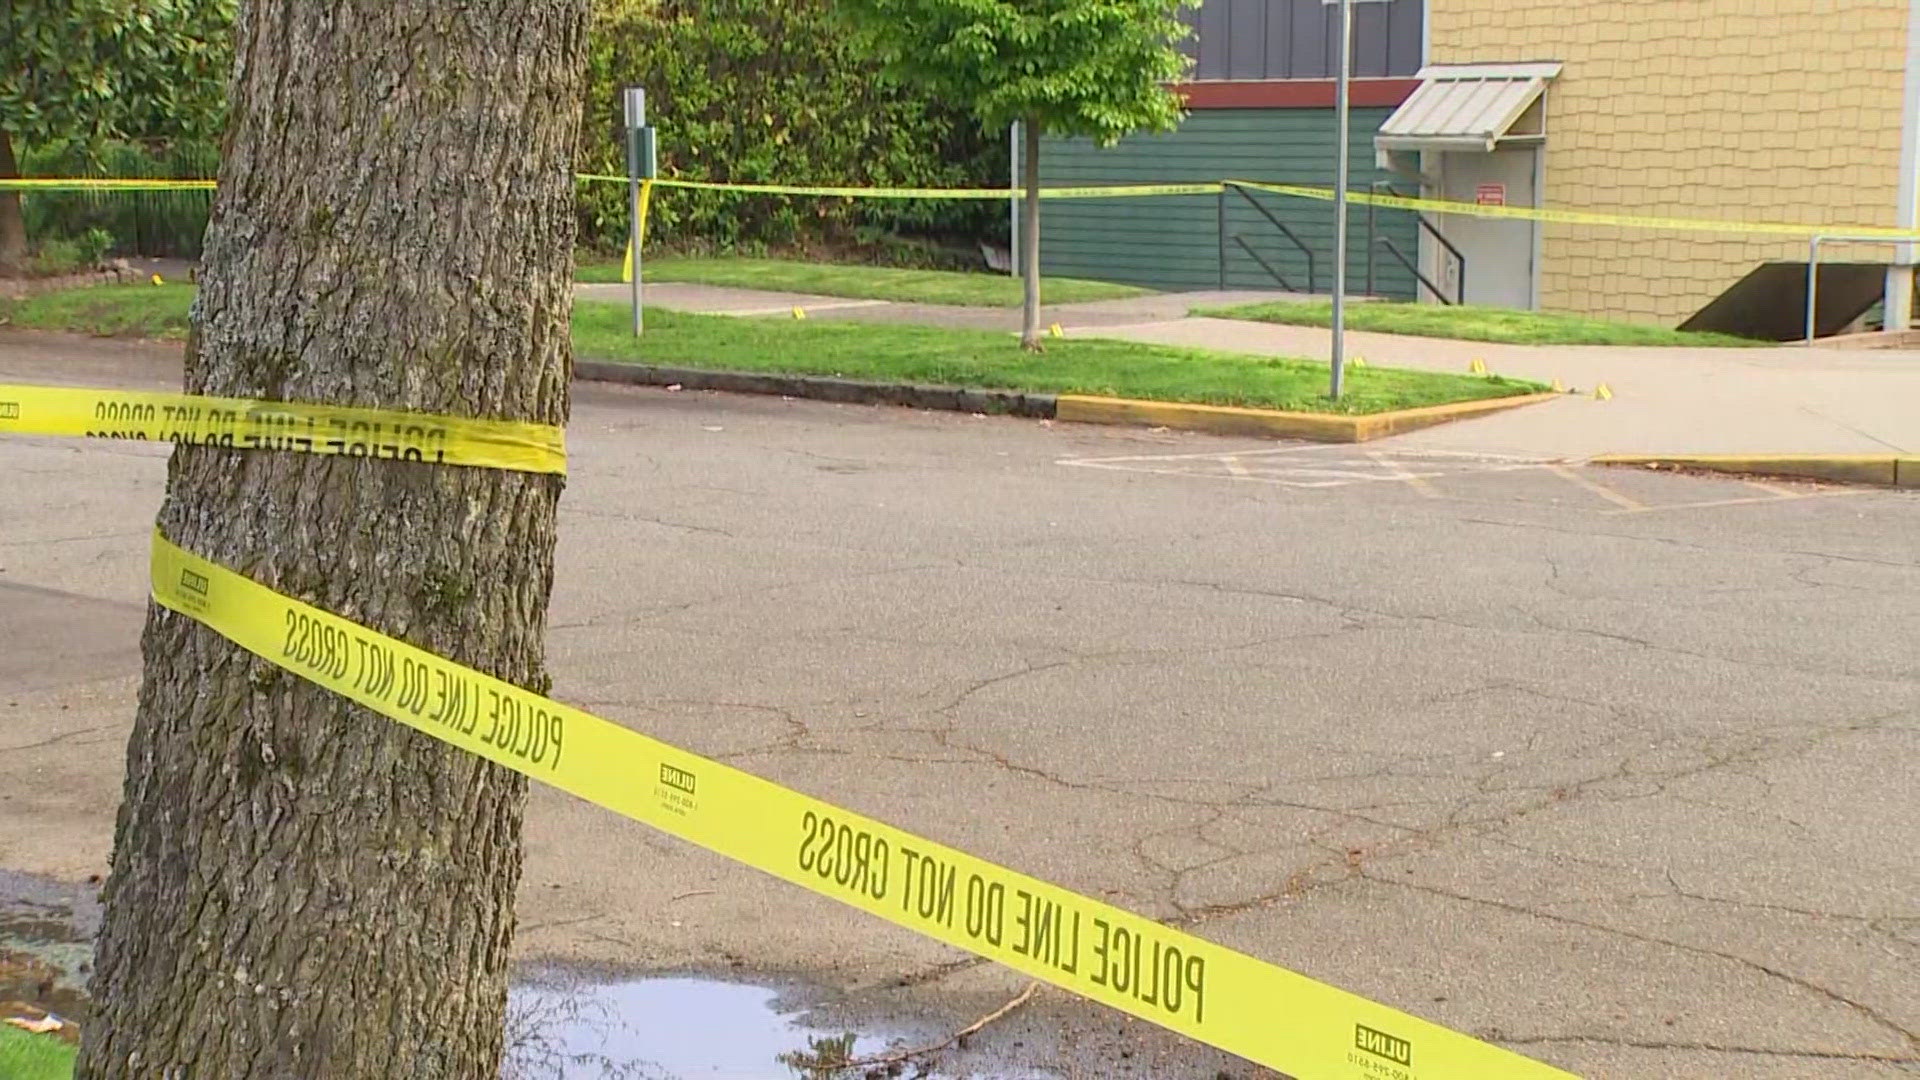 Tacoma police are investigating a potential homicide after a woman was found dead in Tacoma's Stadium District